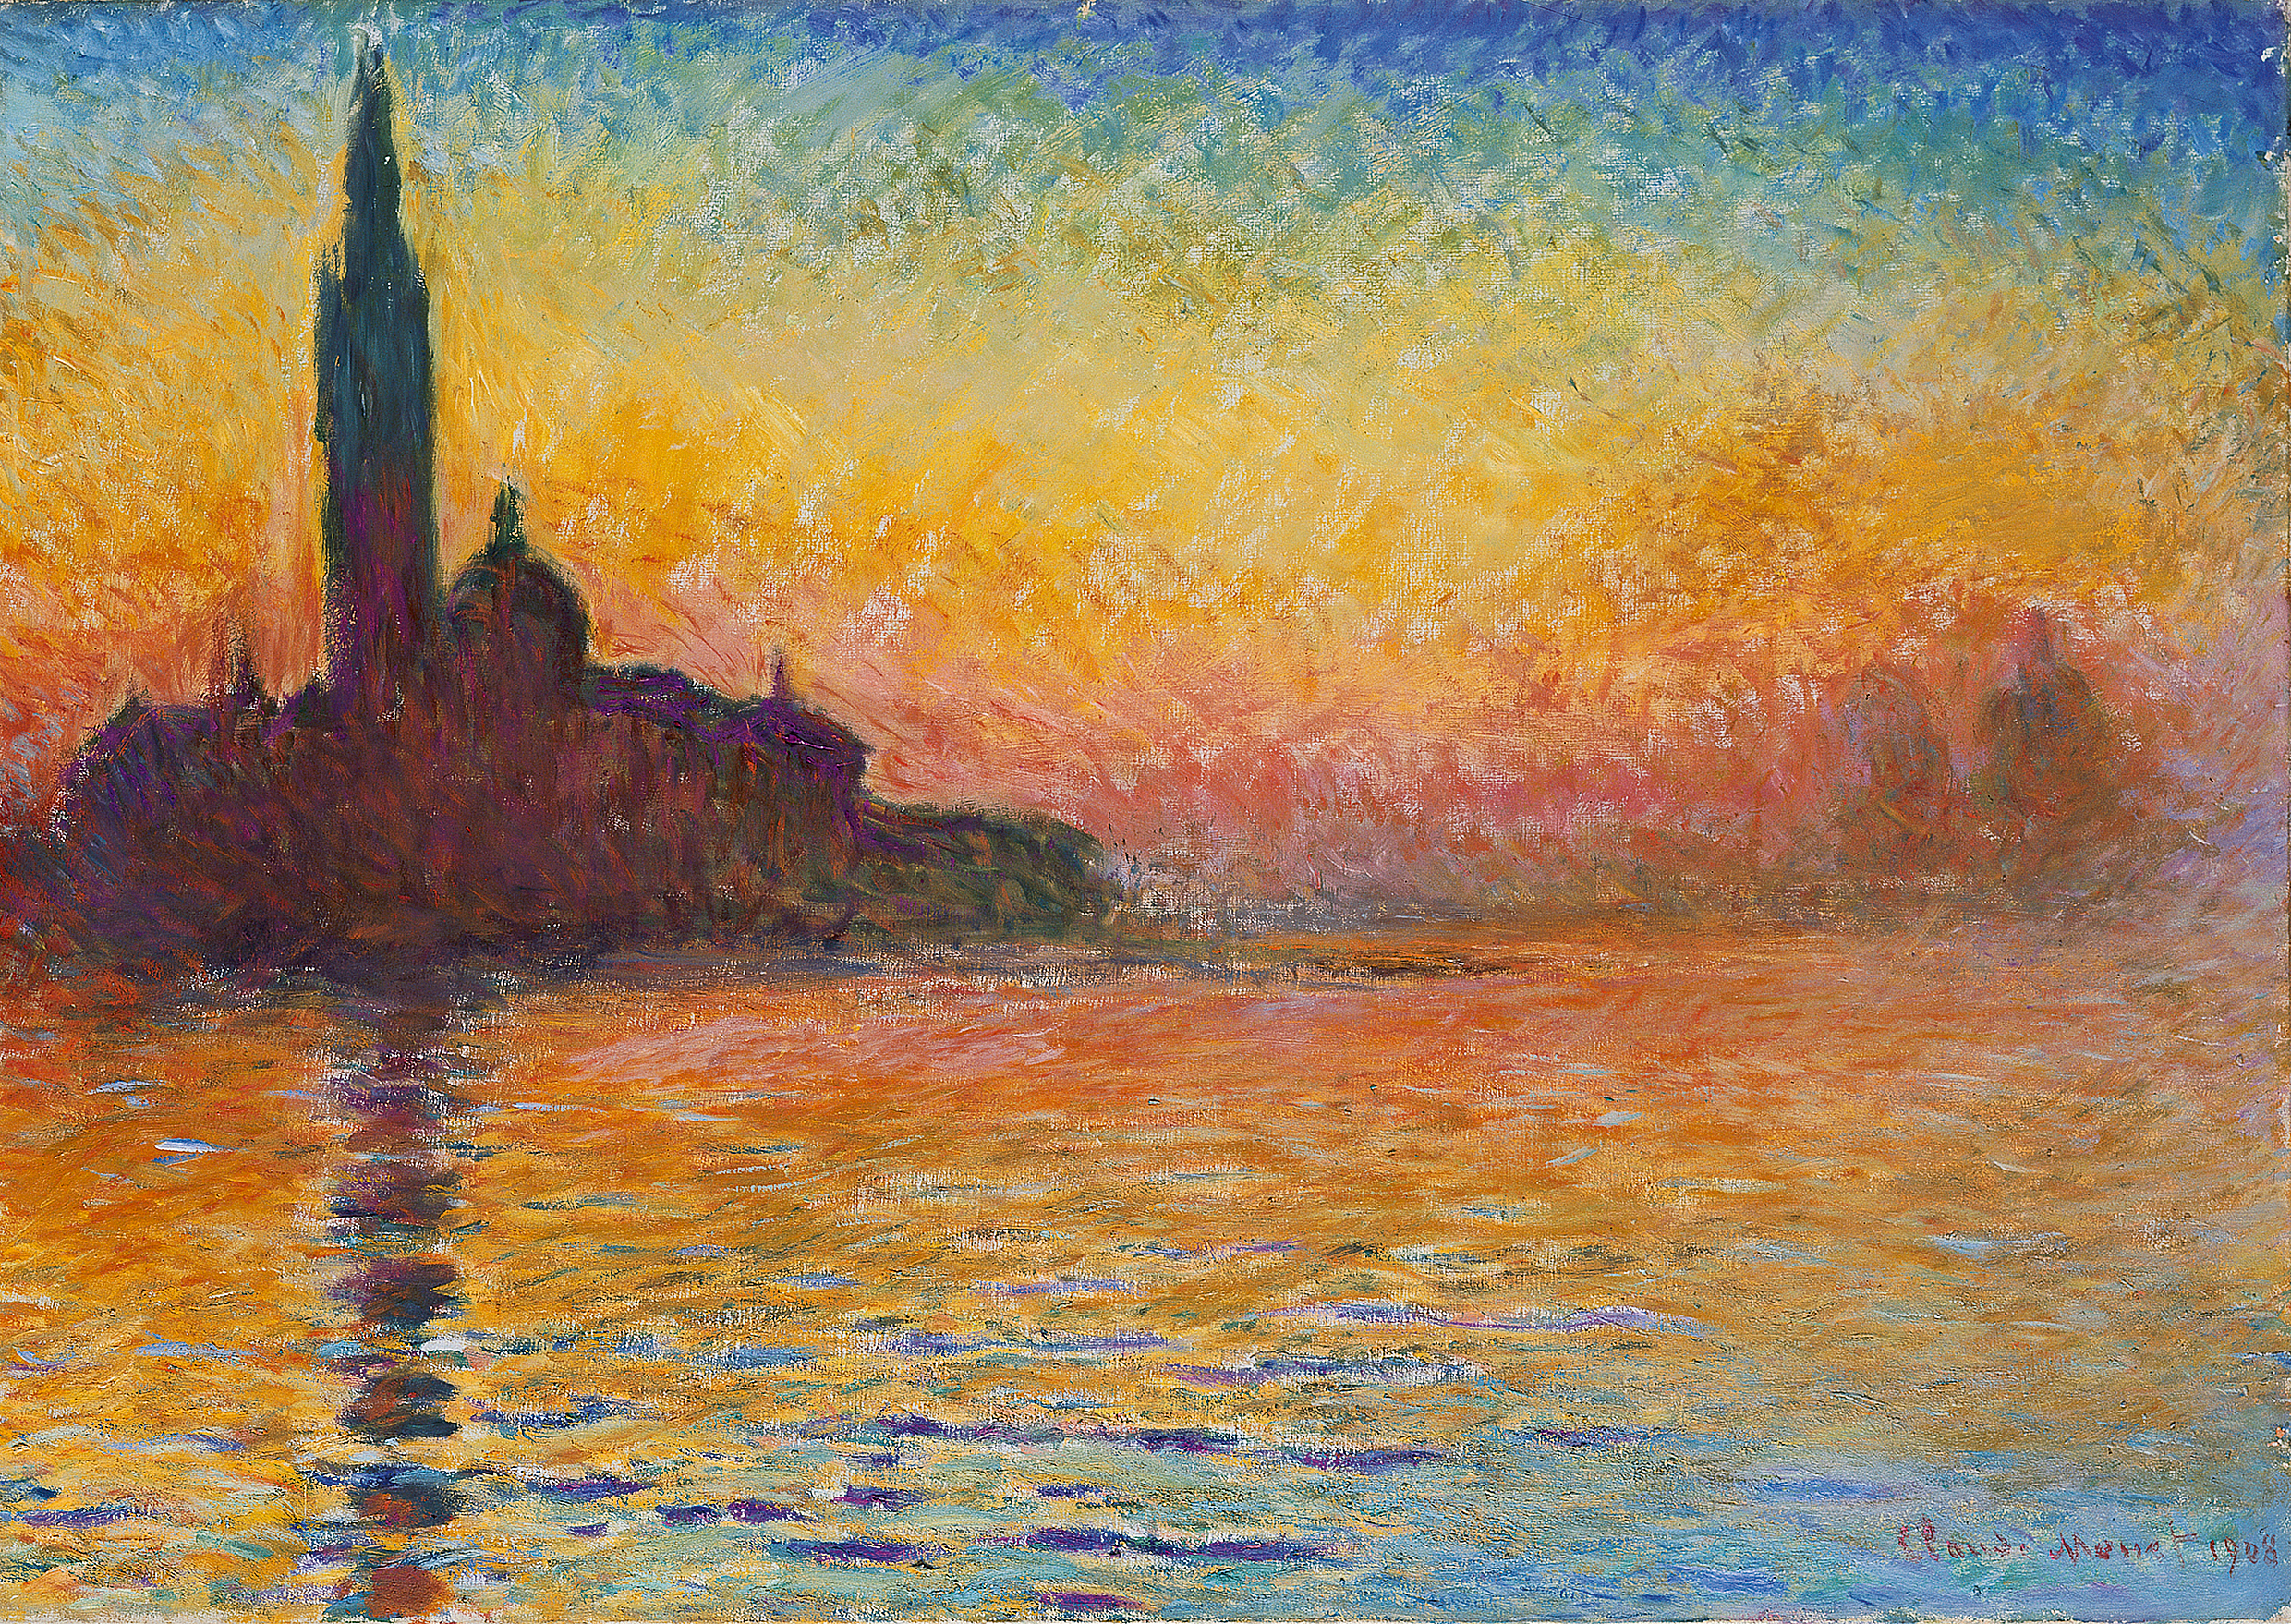 San Giorgio Maggiore at Dusk by Claude Monet - 1908 - 65.2 x 92.4 cm National Museum Cardiff